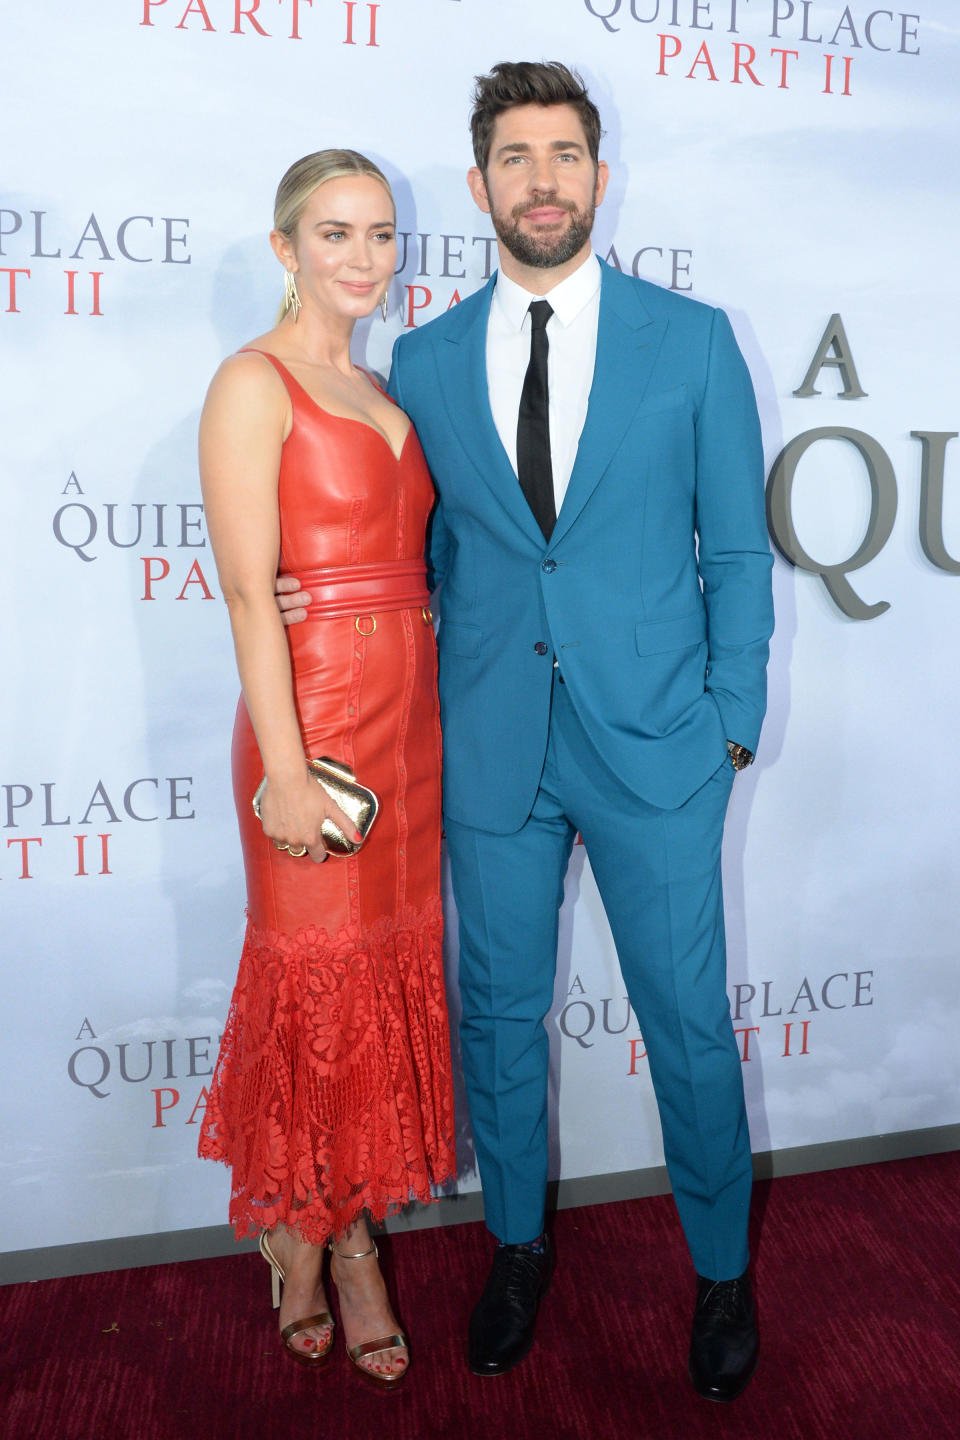 NEW YORK, NY - MARCH 8: Emily Blunt and John Krasinski attend the world premiere of "A Quiet Place Part II" on March 8, 2020 at Rose Theater, Jazz at Lincoln Center in New York City. (Photo by Paul Bruinooge/Patrick McMullan via Getty Images)